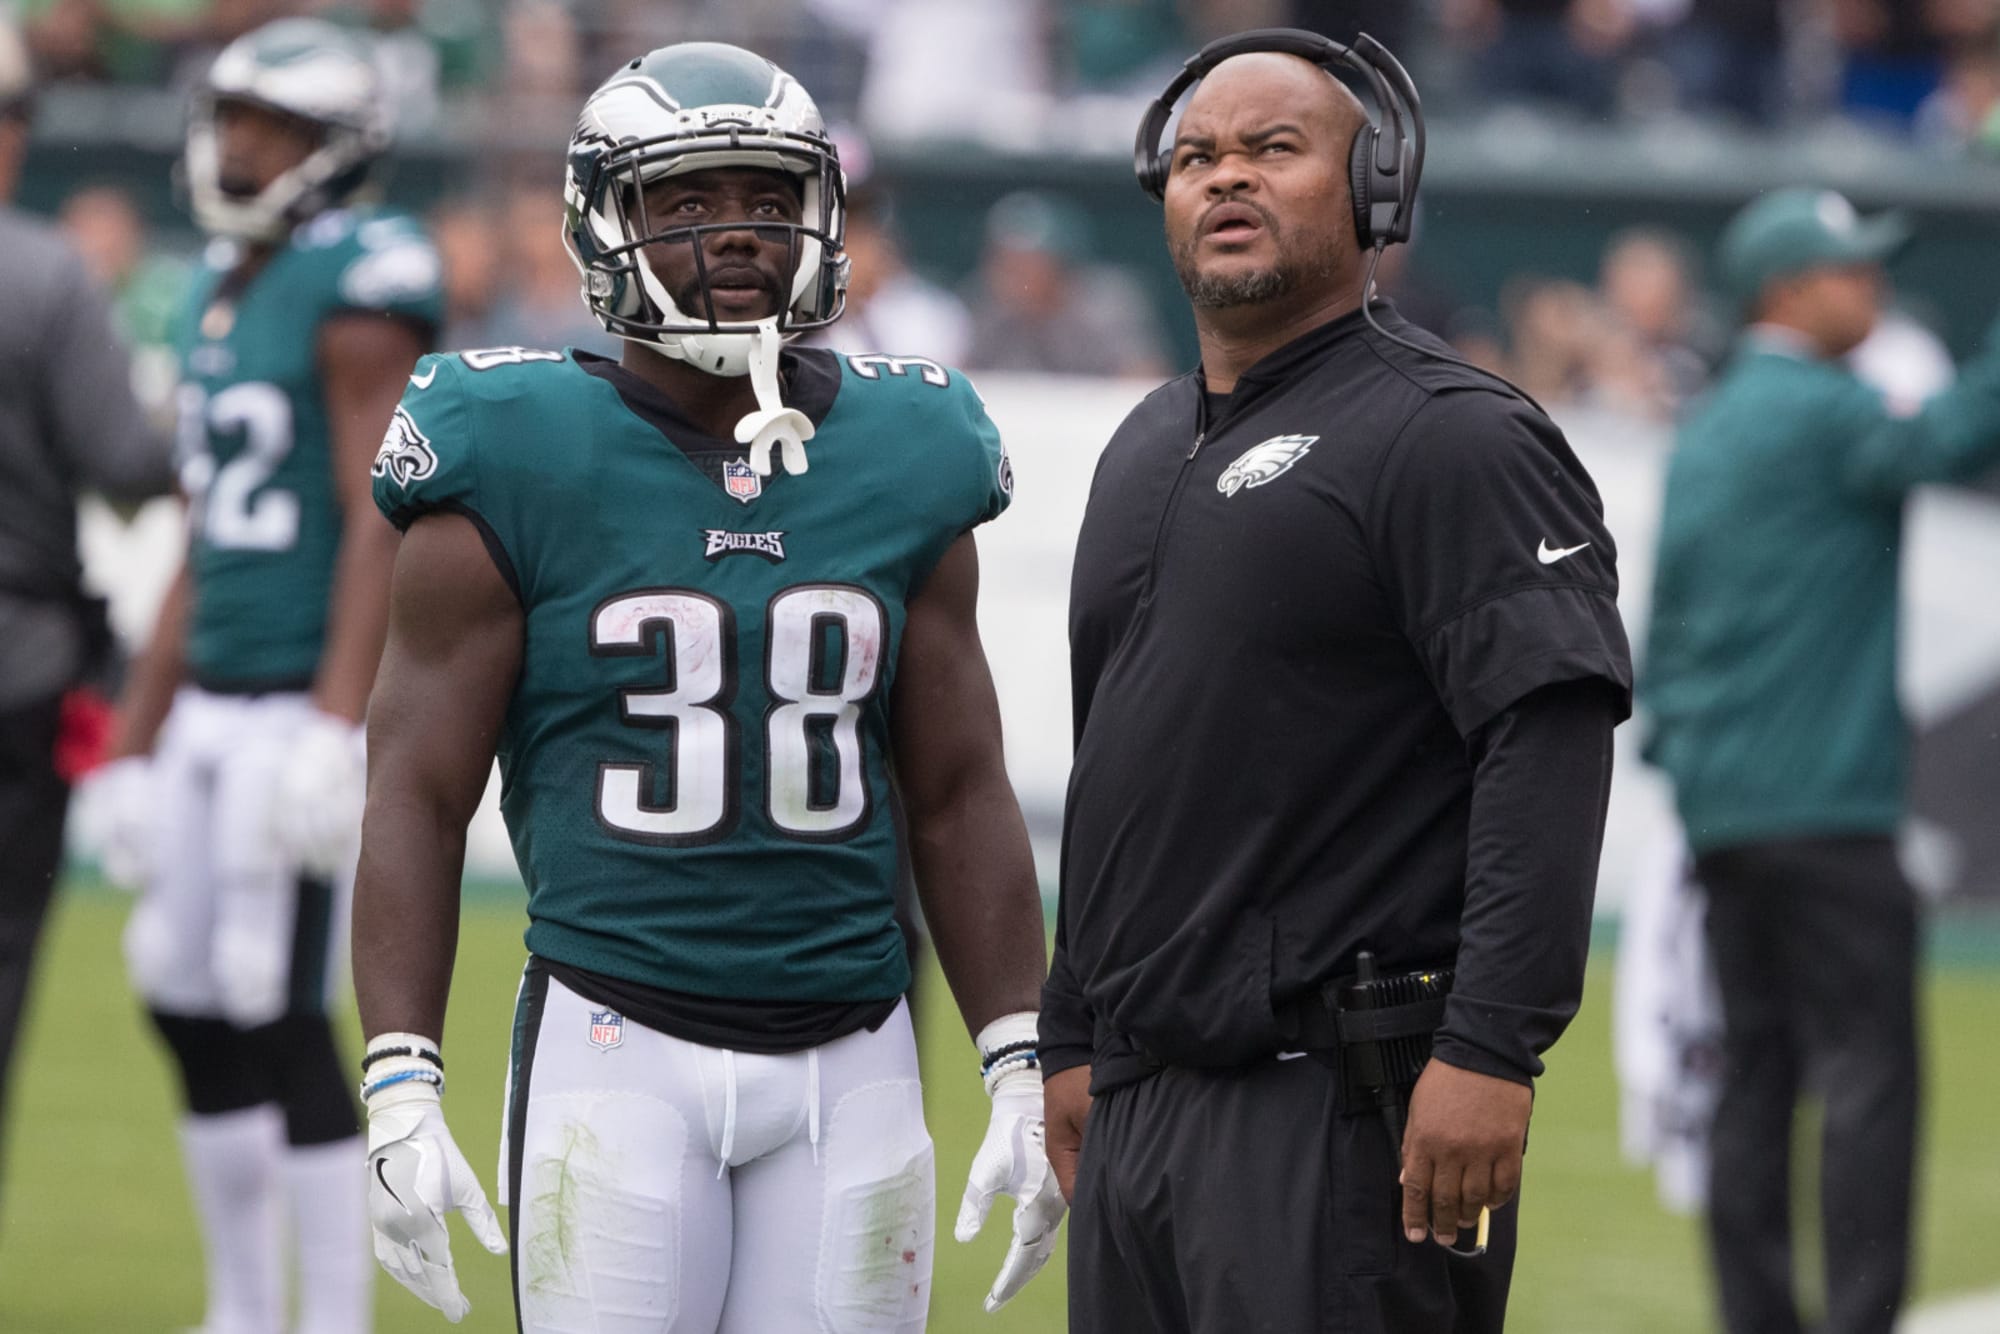 Duce Staley will be interviewed for jobs at Eagles HC